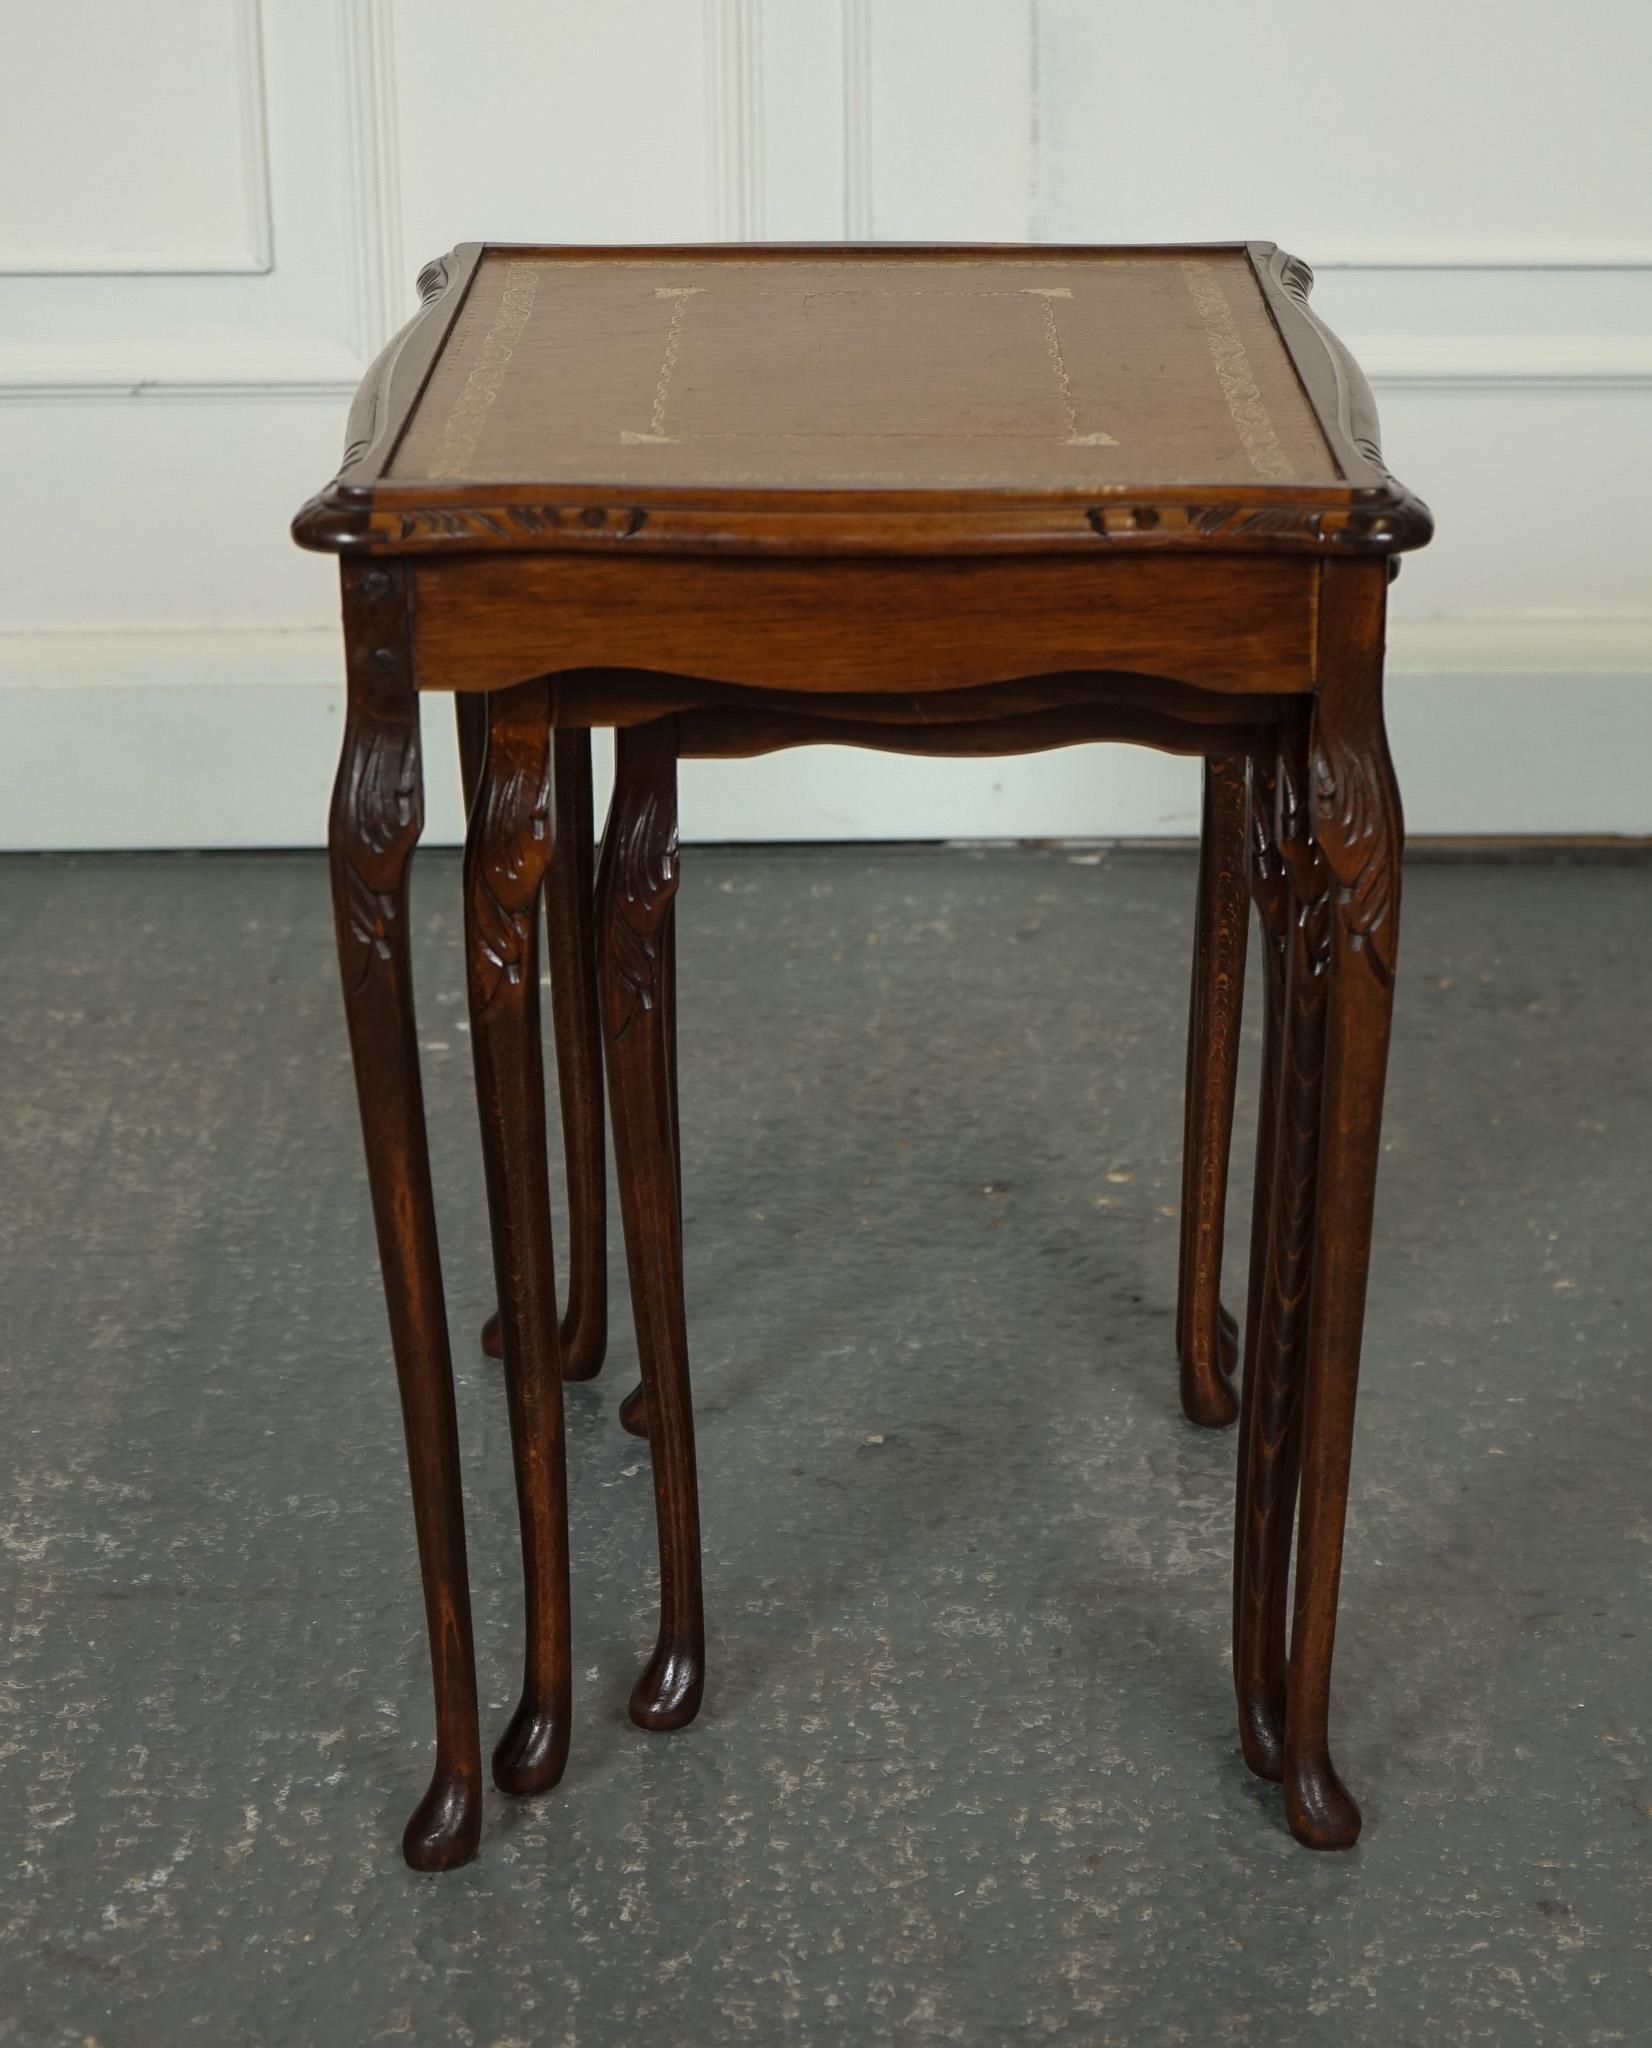 VINTAGE NEST OF TABLES QUEEN ANNE STYLE LEGS WiTH BROWN EMBOSSED LEATHER TOP J1 In Good Condition For Sale In Pulborough, GB